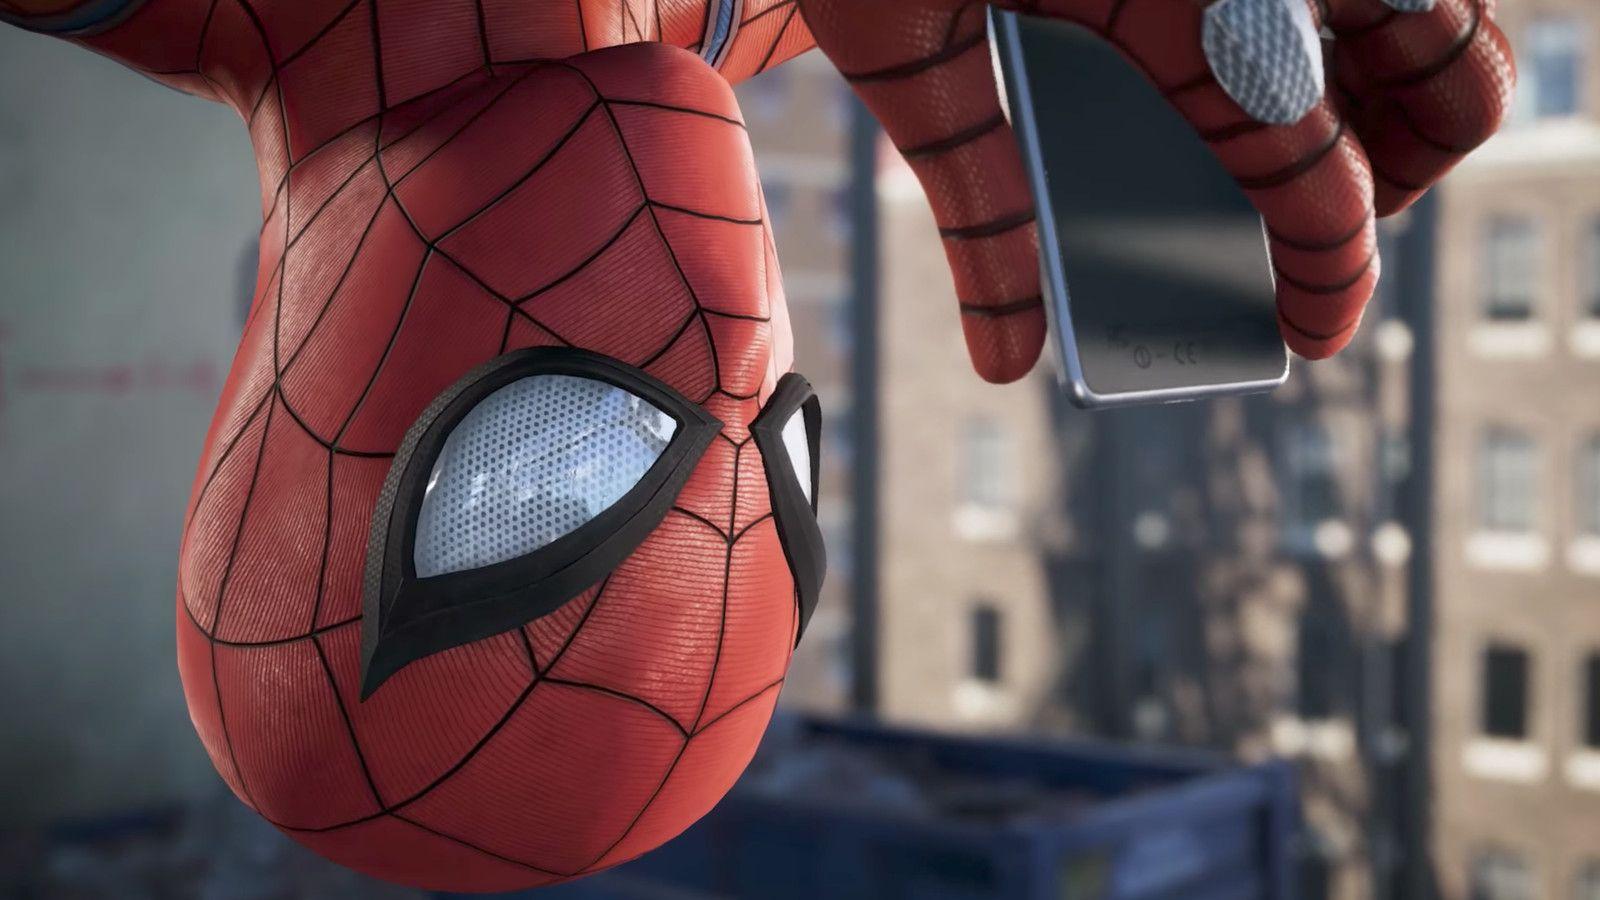 Spider Man's 9 Minute Gameplay Video Features An Elaborate